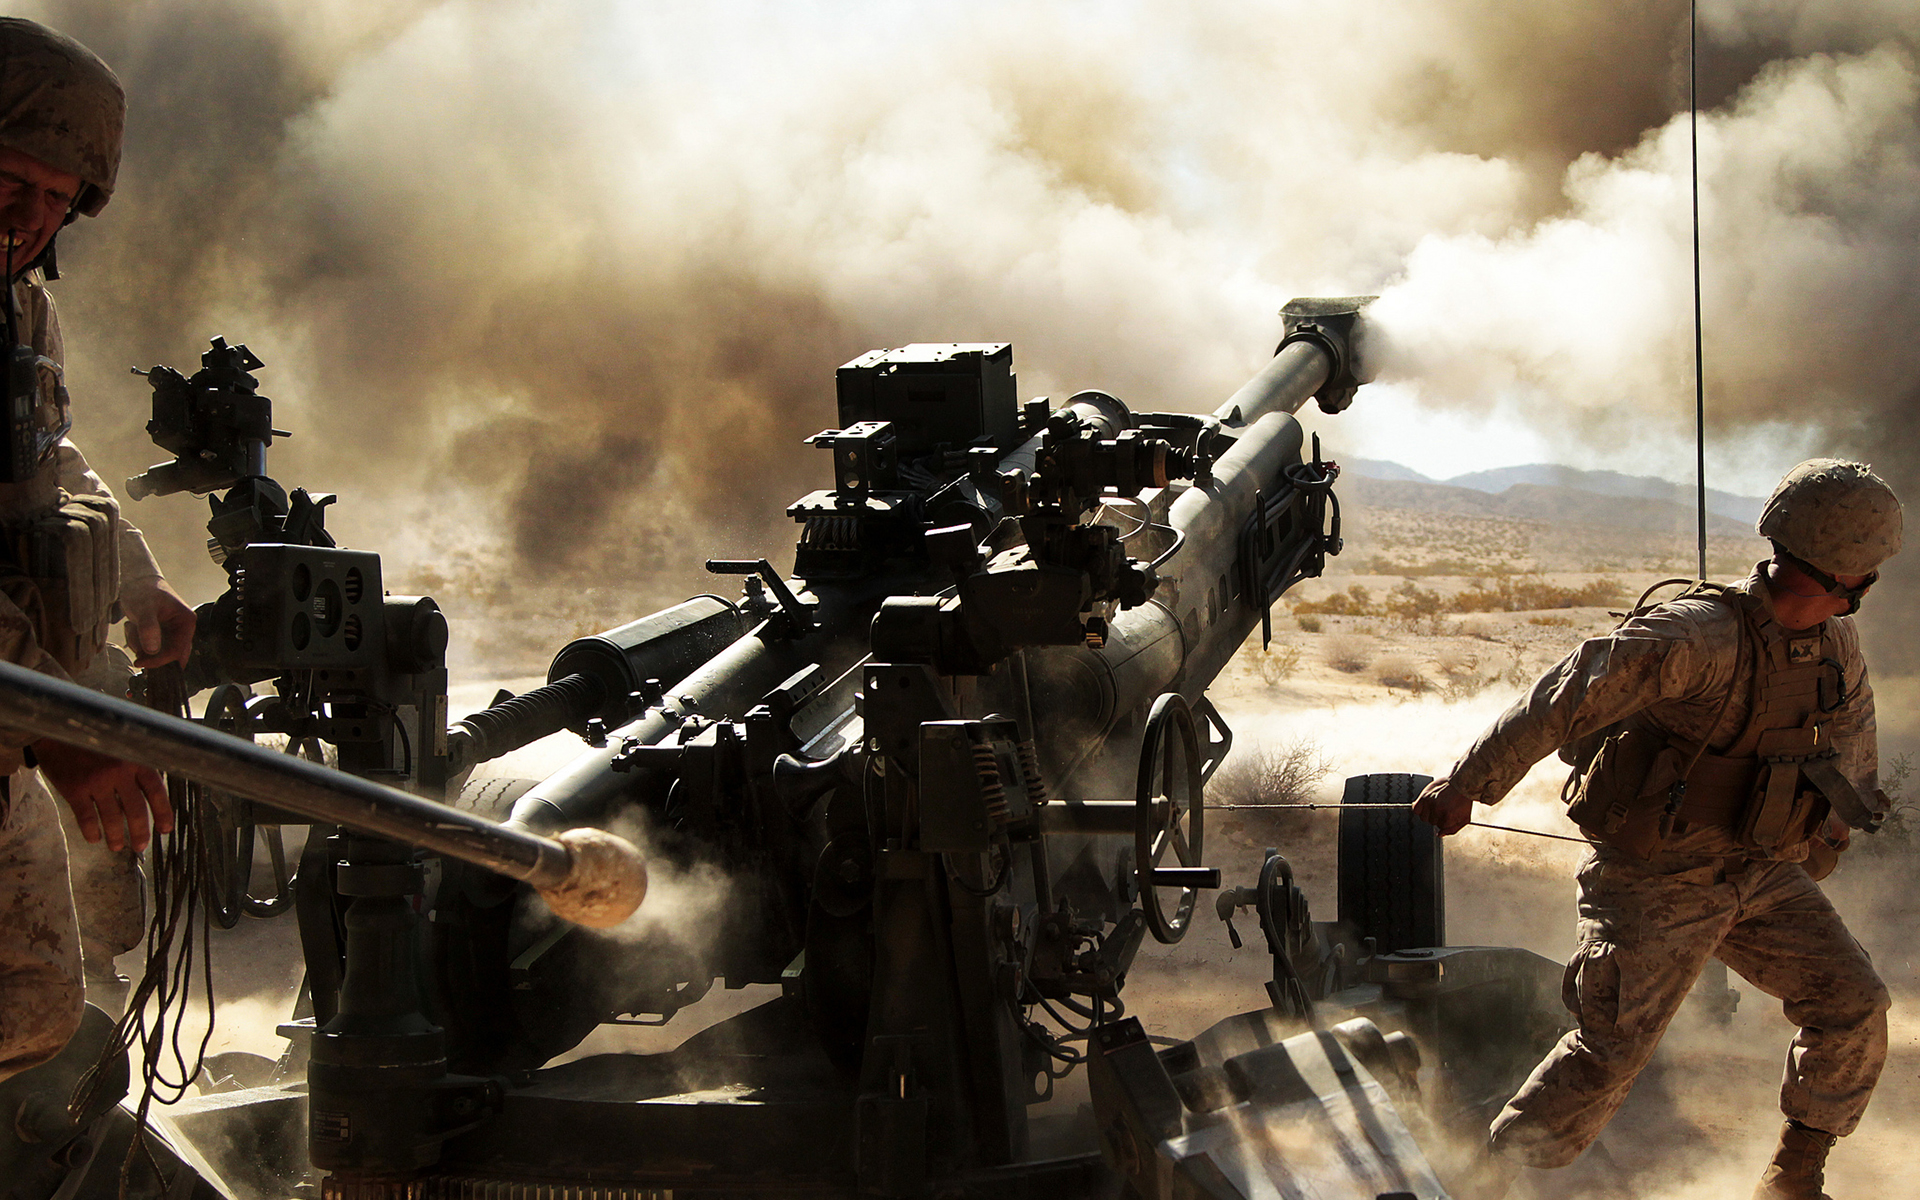 cannon, Mortar, Explosion, Military, Soldiers, Soldior, Warrior, Warriors, Weapons, Weapon Wallpaper